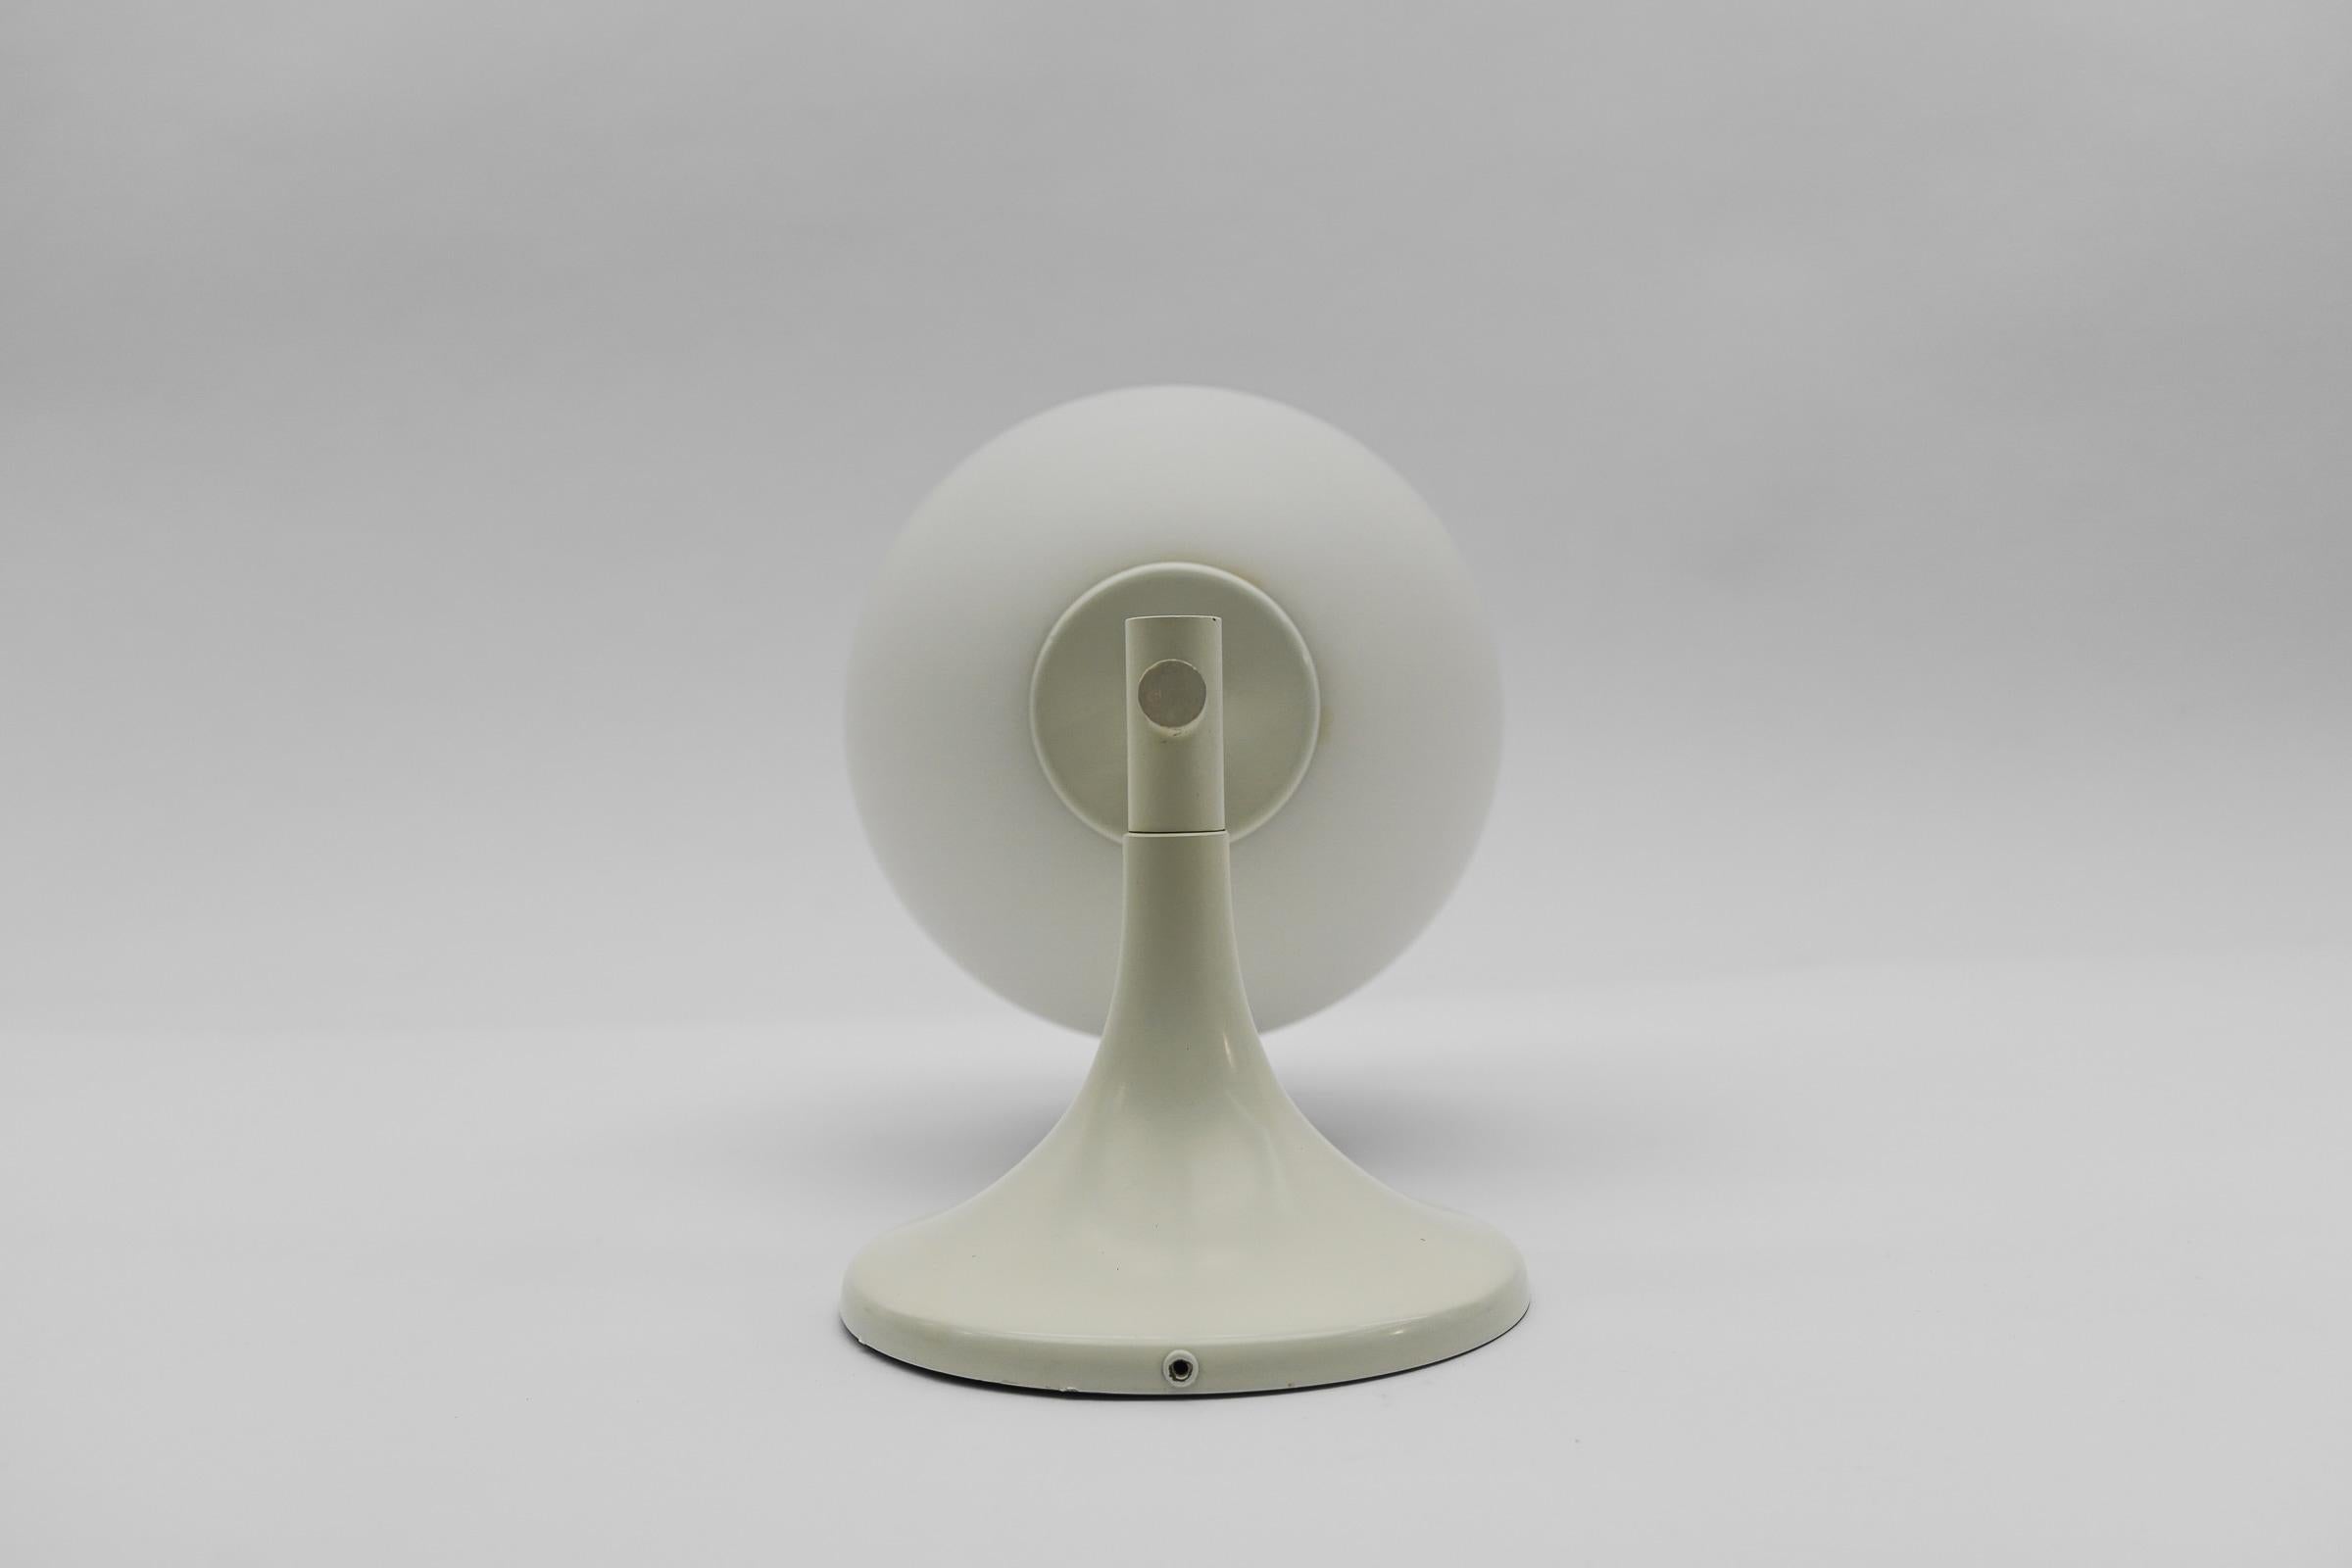 Painted Rare Wall Light in White by Max Bill for Temde, Switzerland, 1960s For Sale